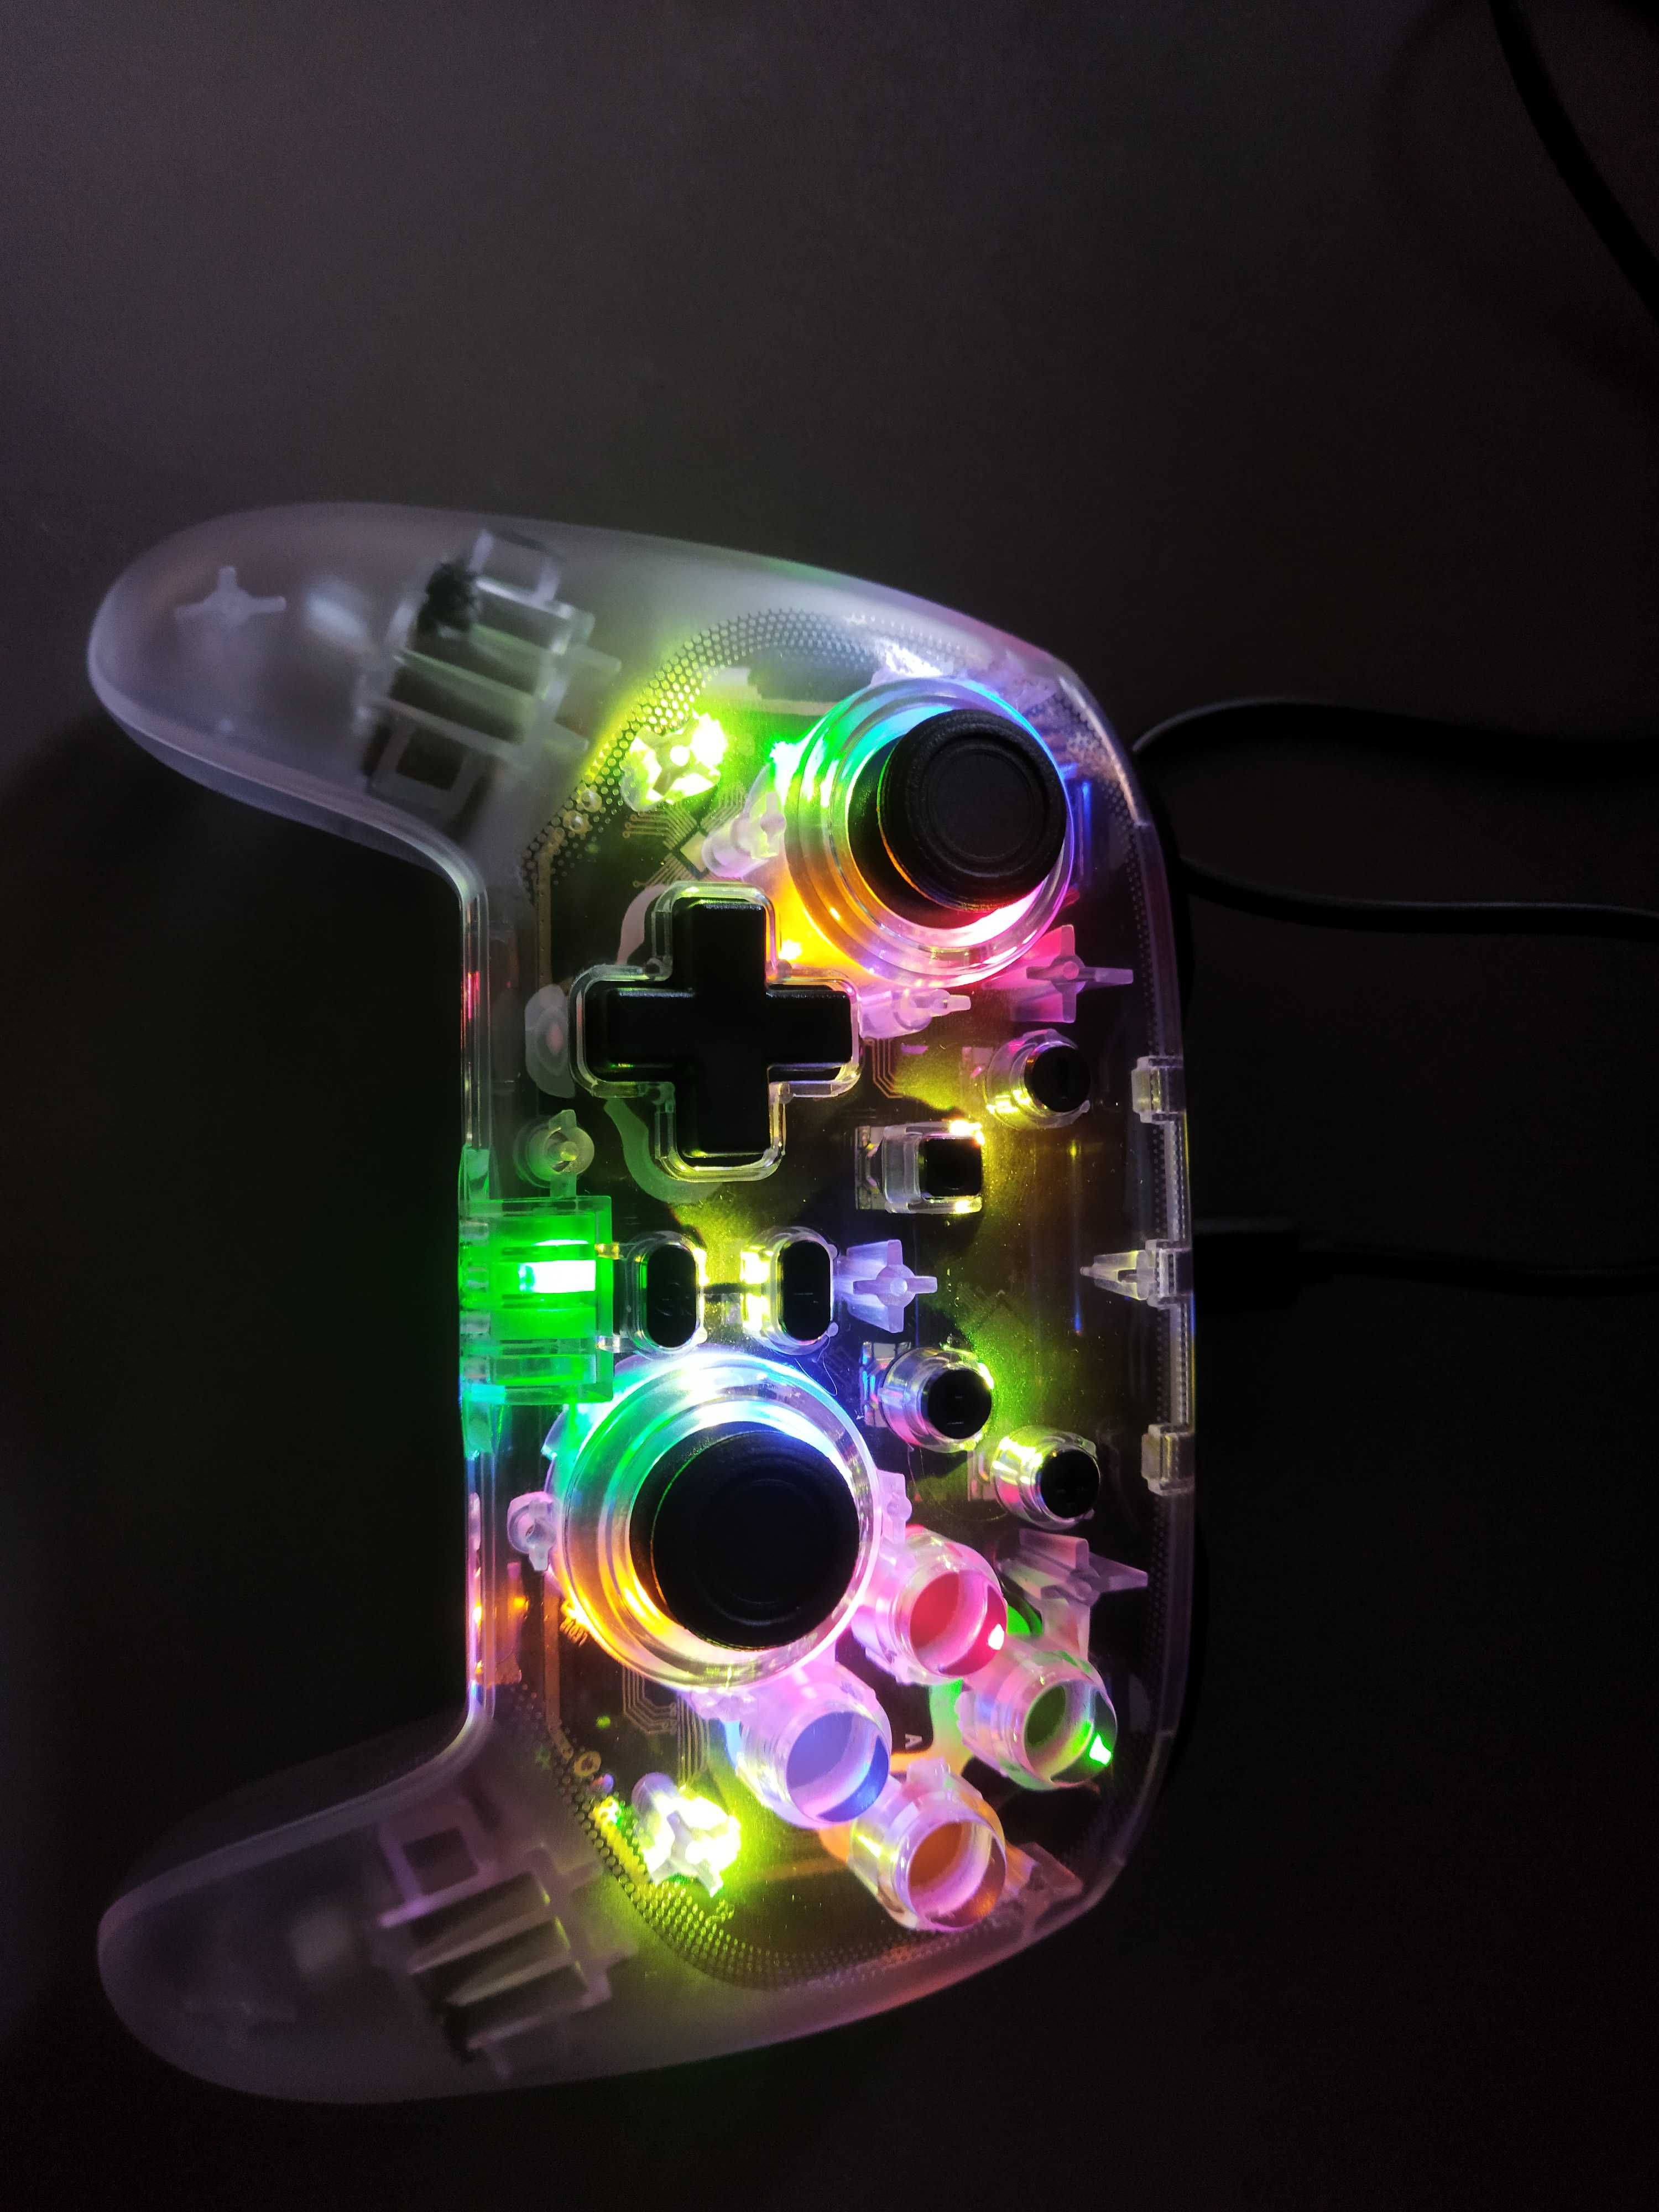 Wireless Gaming controller